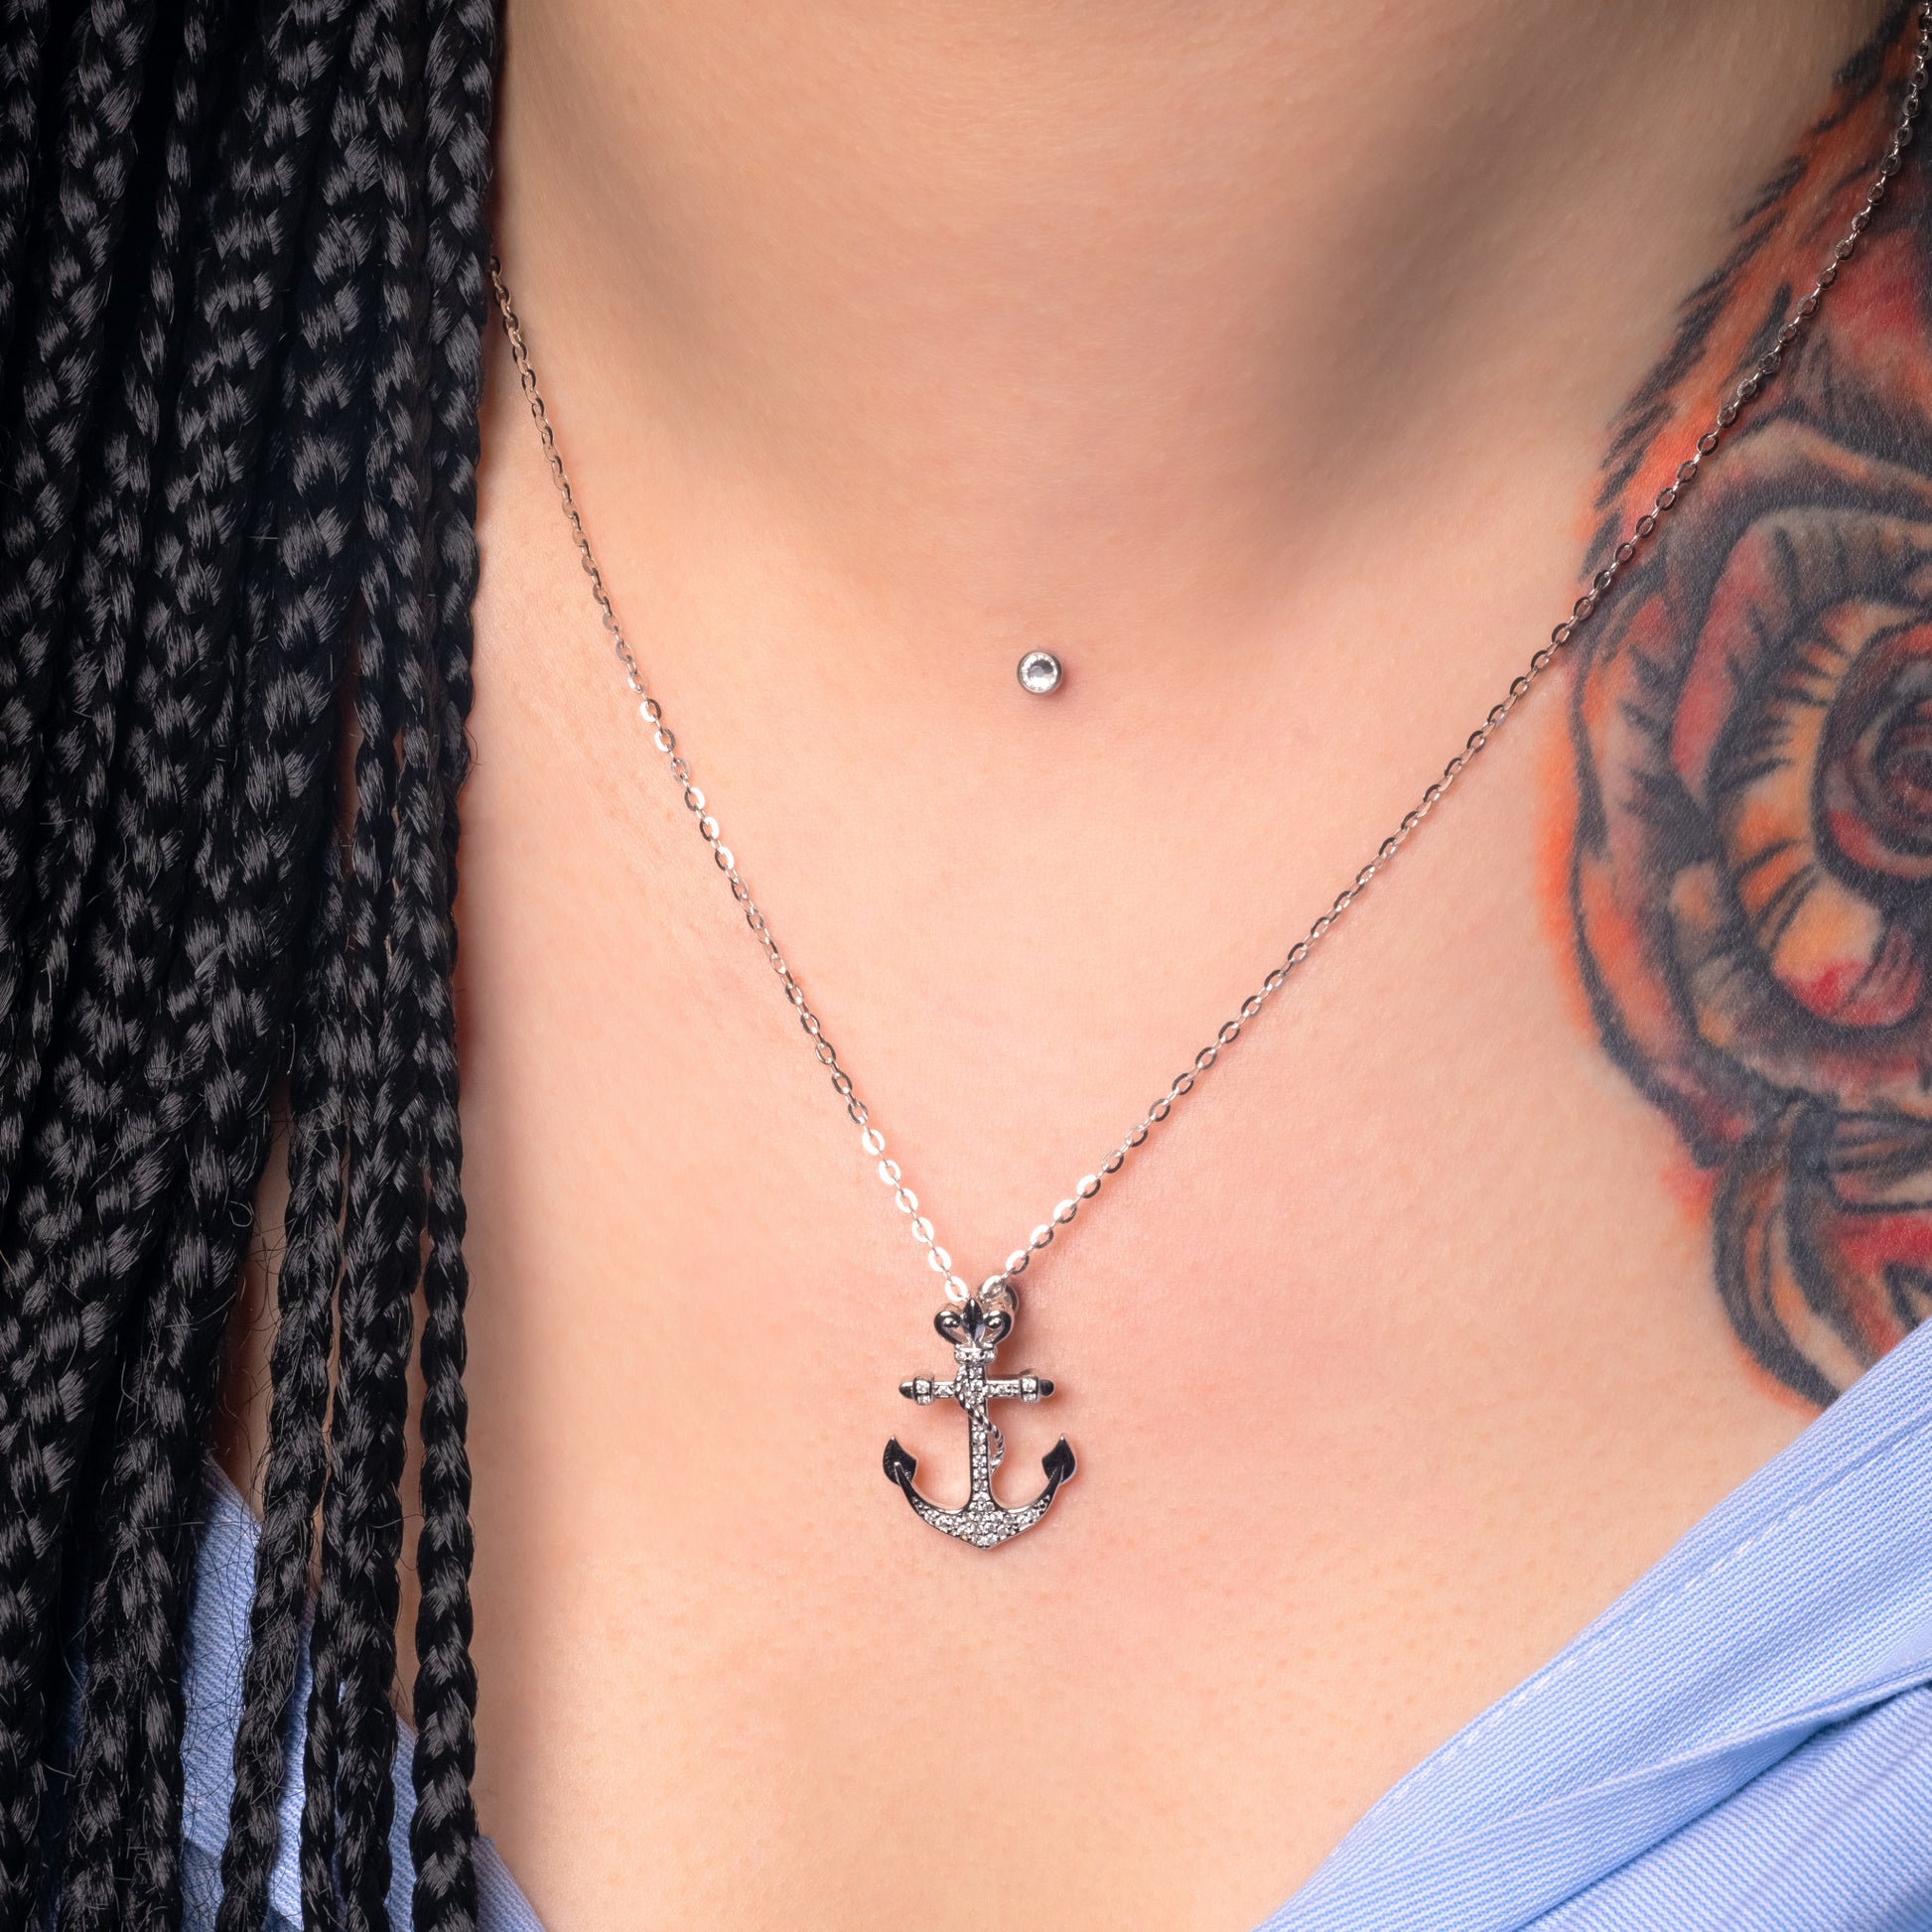 Model wearing Iced Anchor Silver Pendant paired with Flat Cable necklace Zoomed-in view.